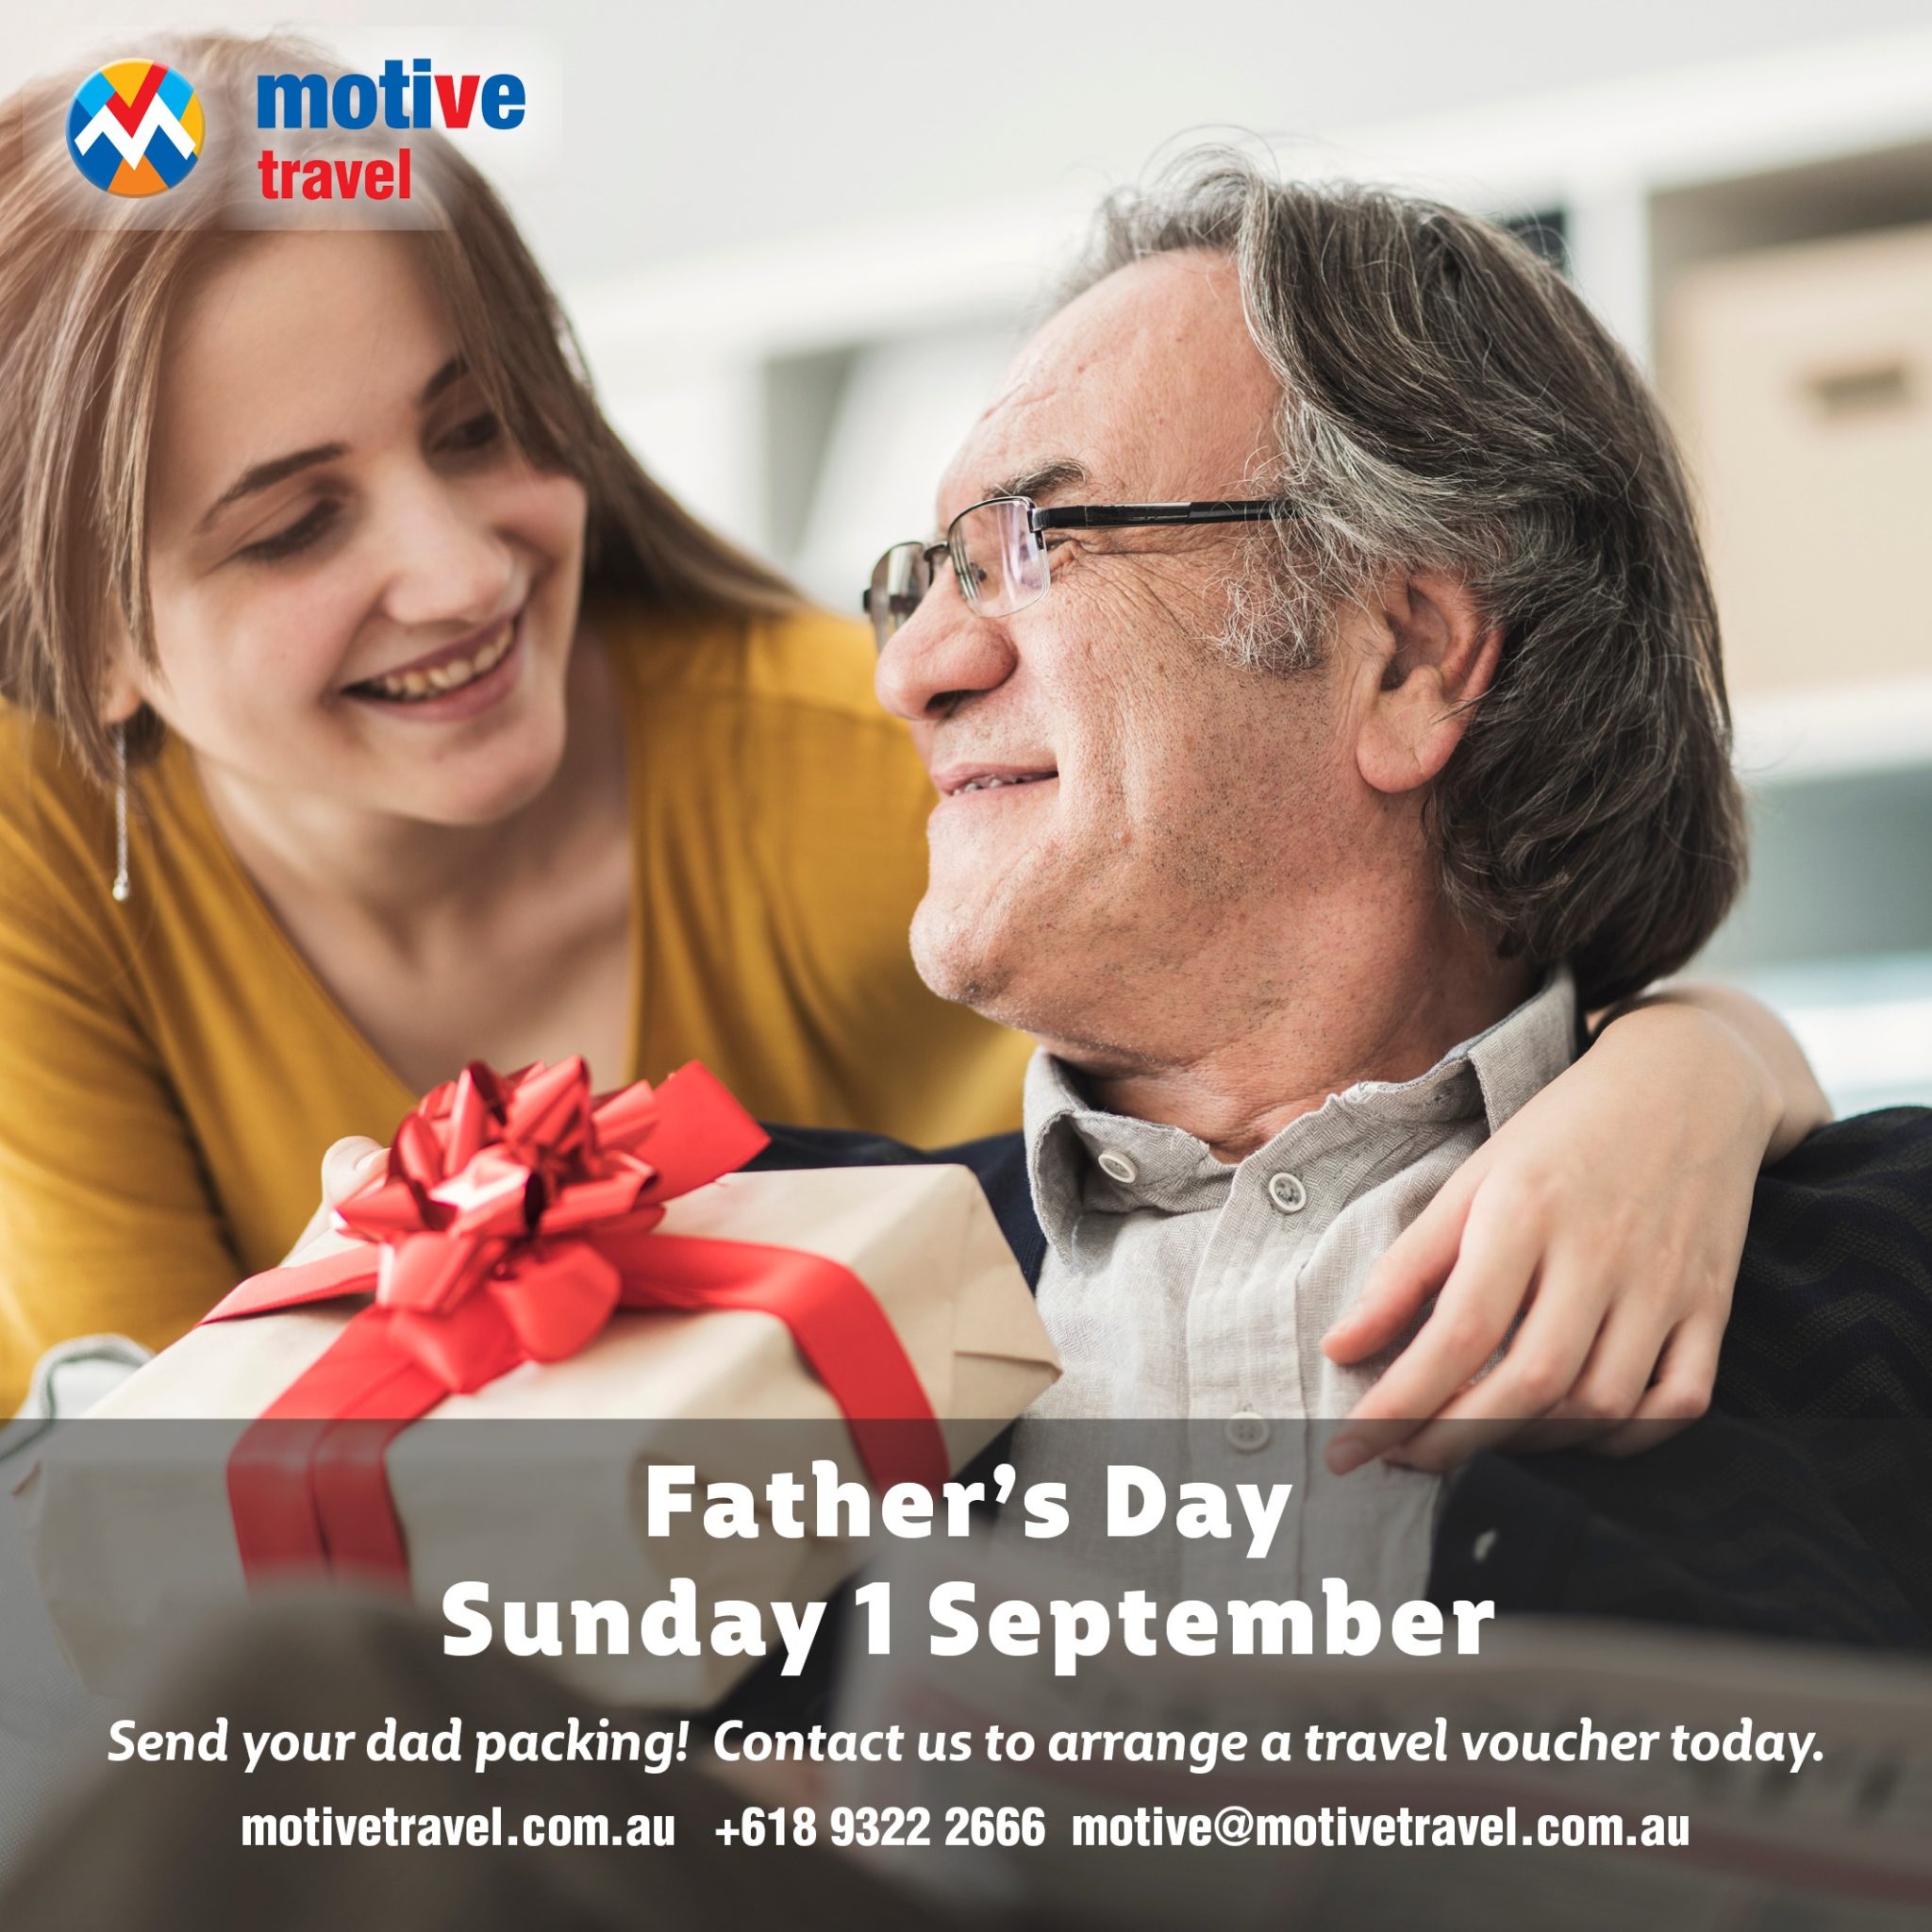 Fathers Day Promotion Image